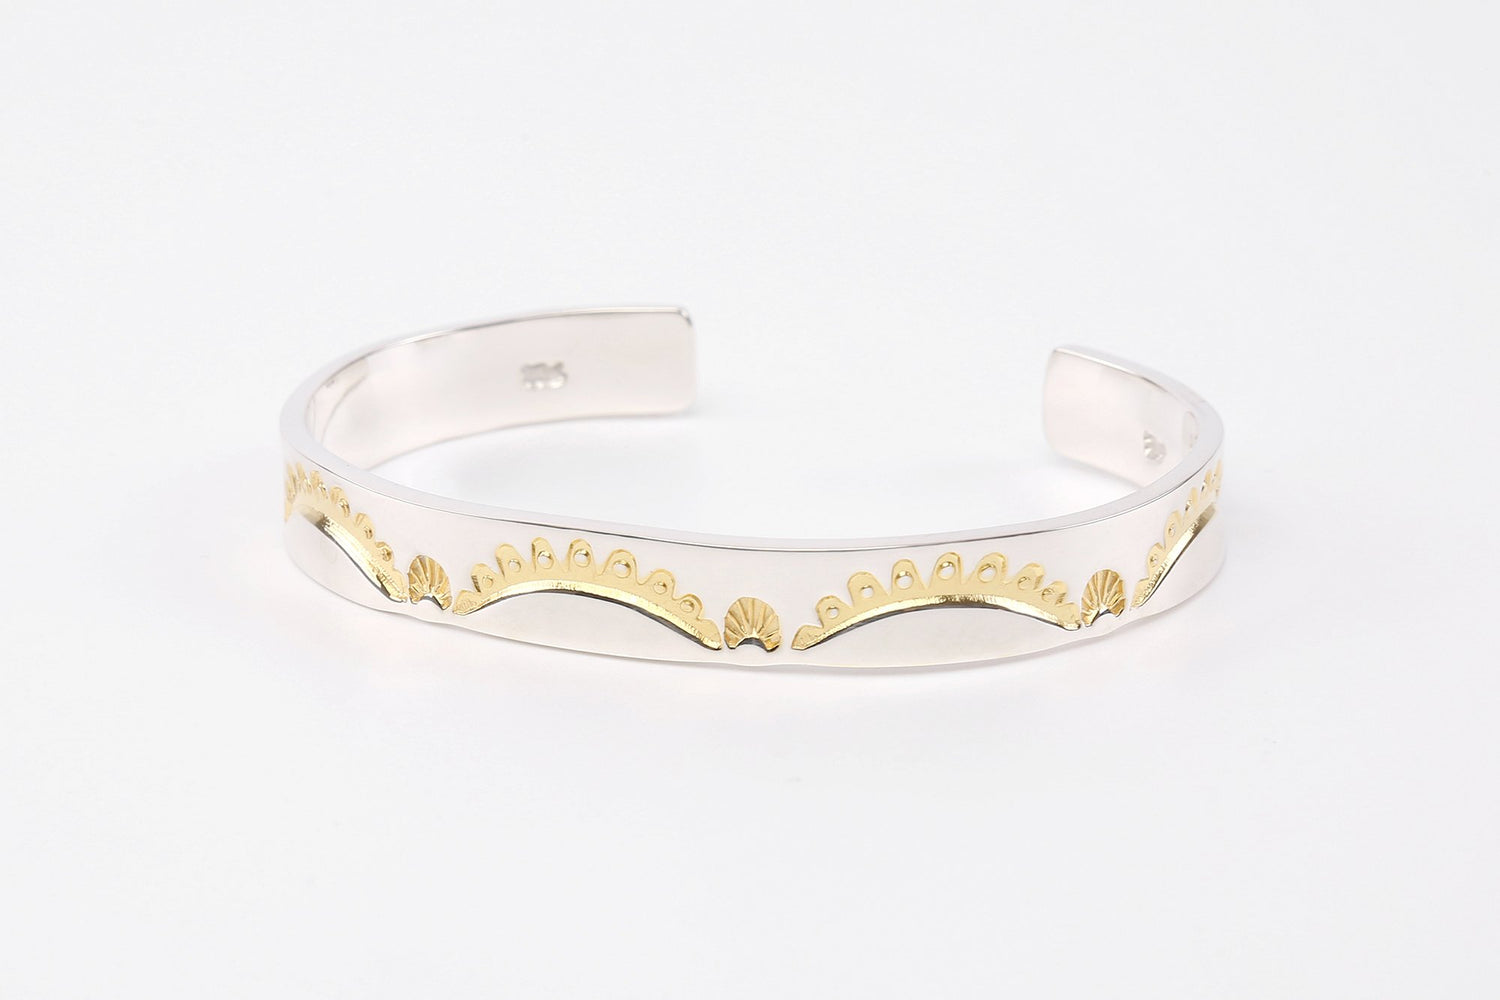 LEGEND 10MM ‘CROWN’ BANGLE WITH 24K GOLD